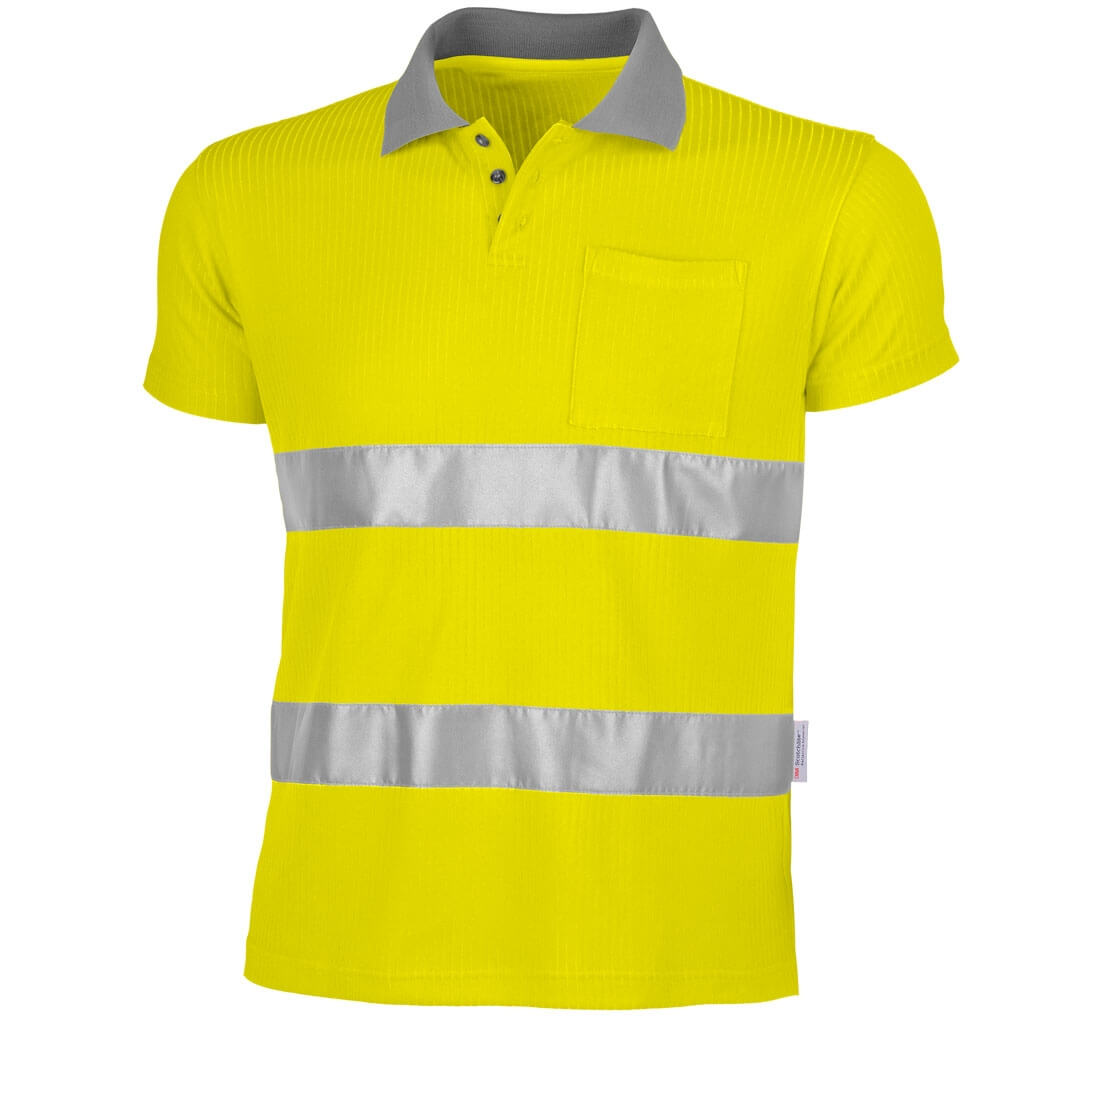 HiVis Polo t-shirt - Safetywear